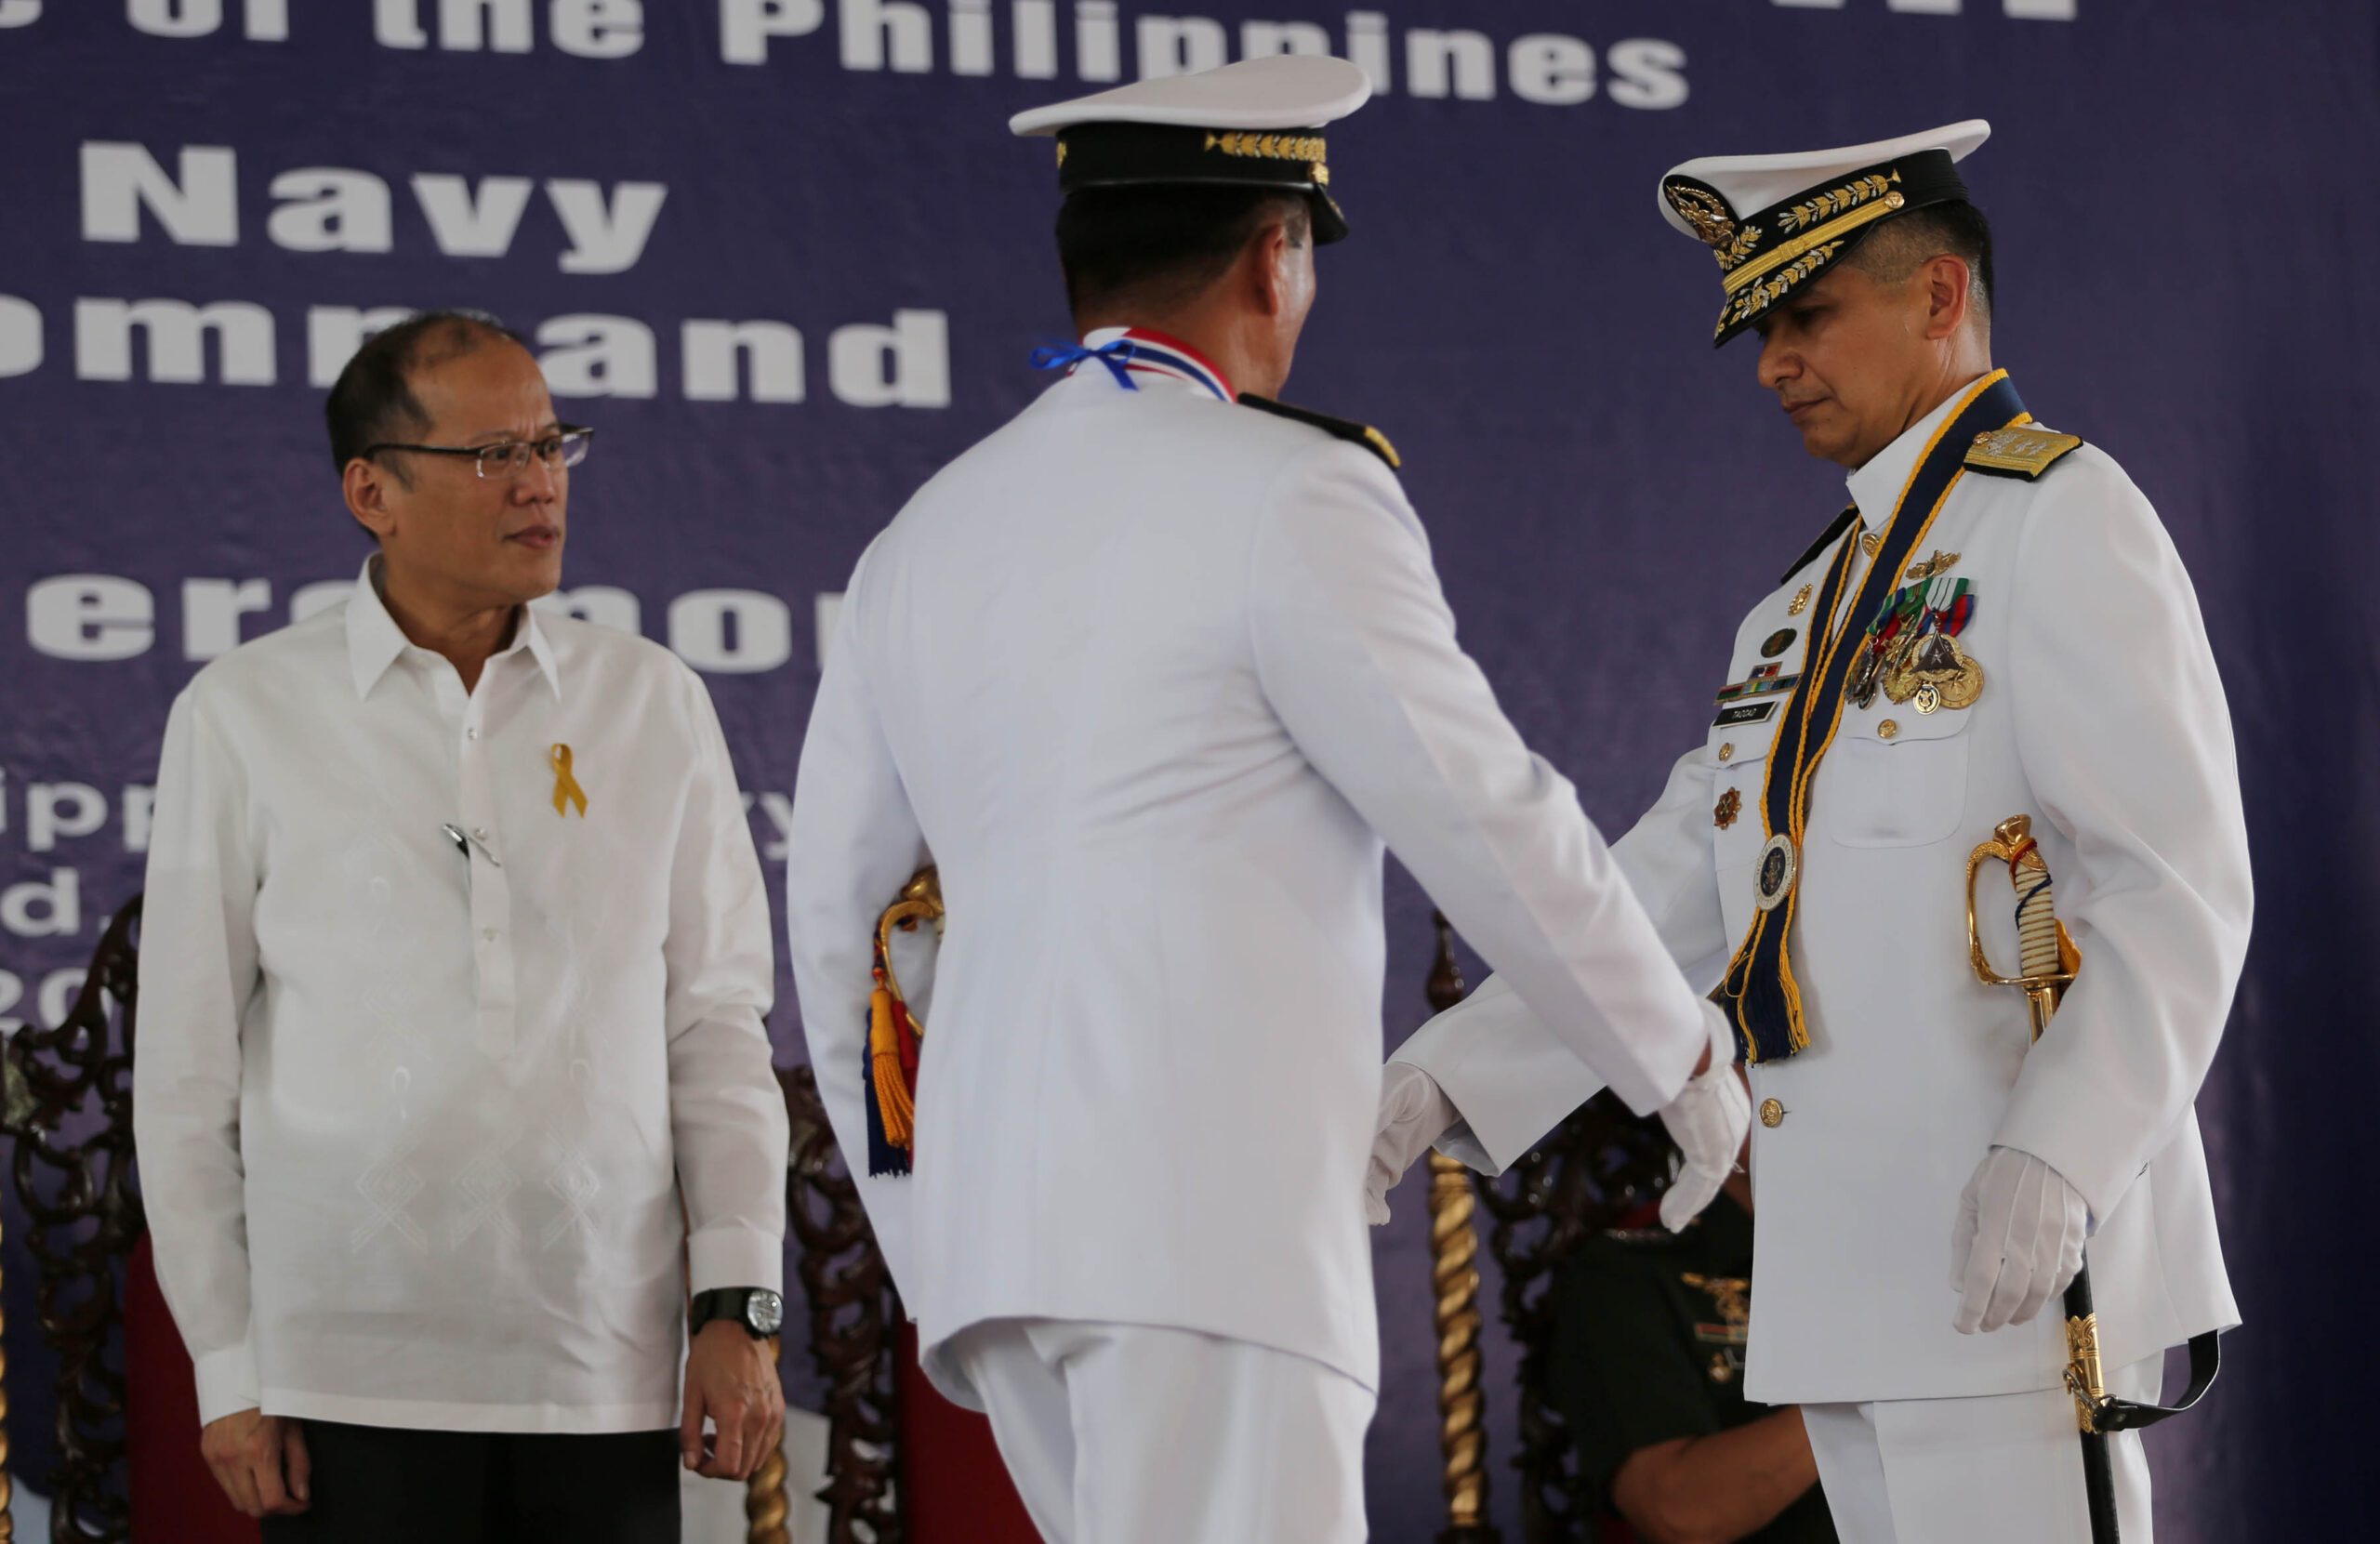 Taccad is new PH Navy chief